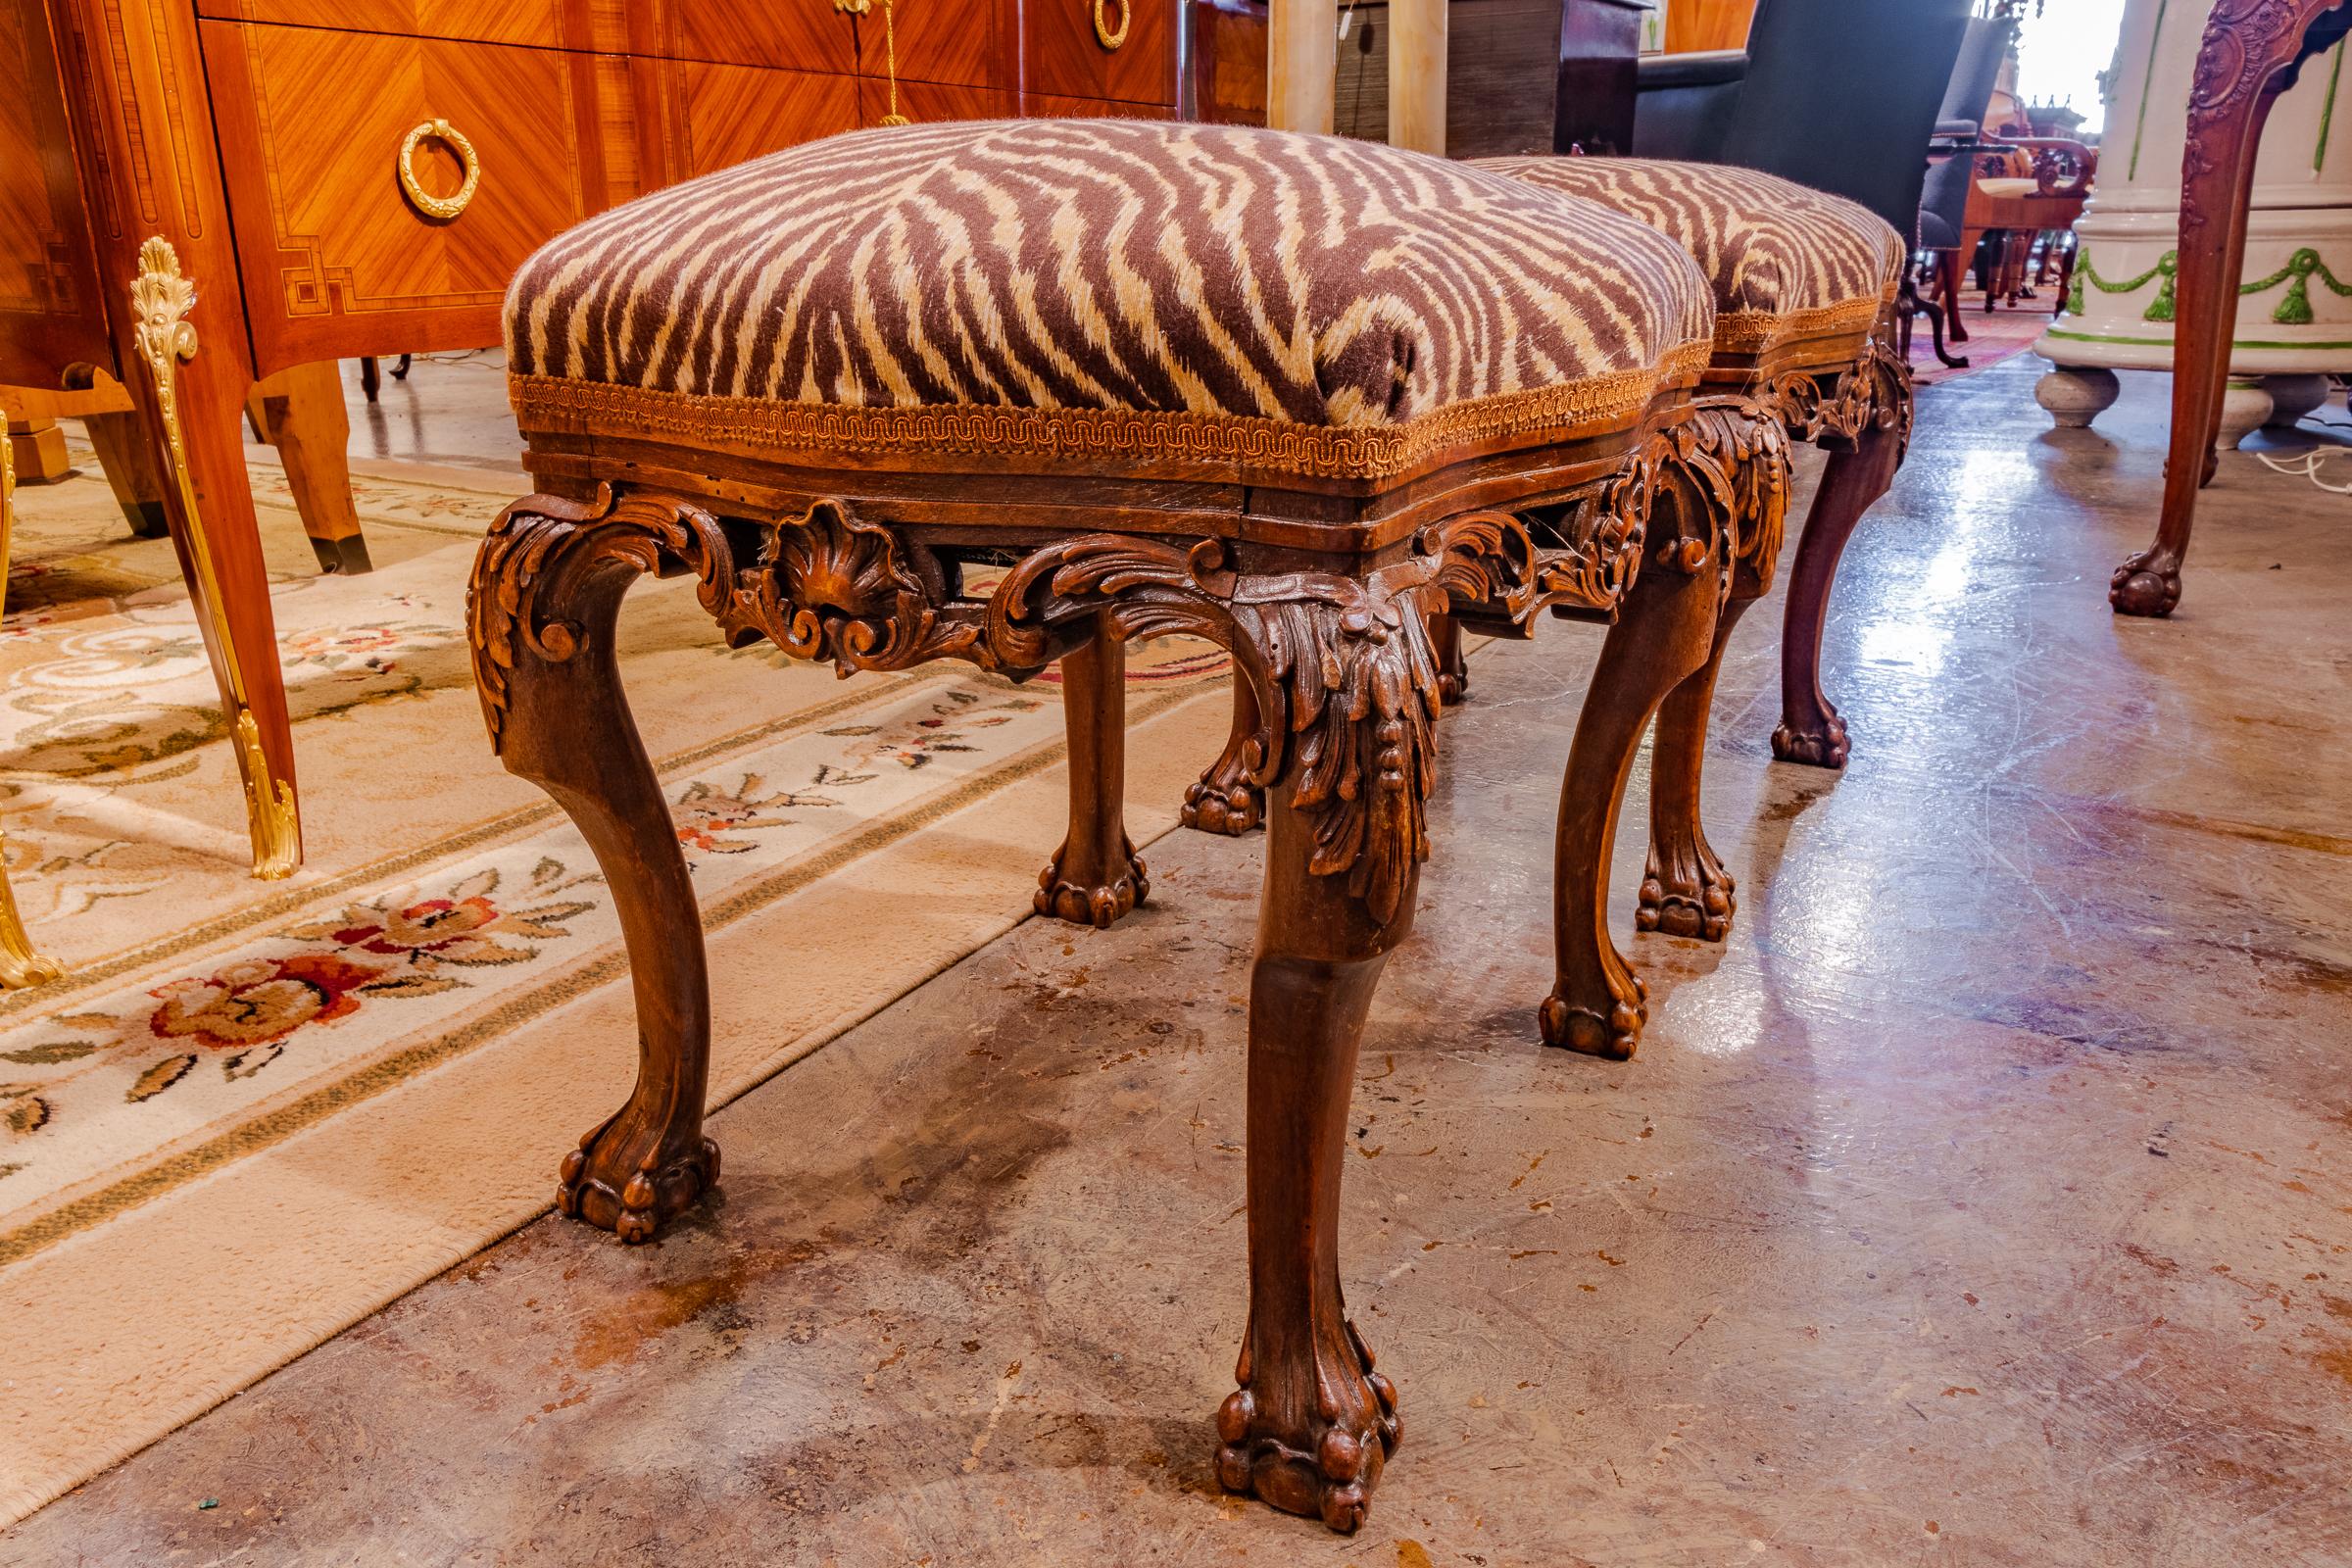 A fine pair of hand carved 19th century French walnut stools with a animal print fabric in great condition.